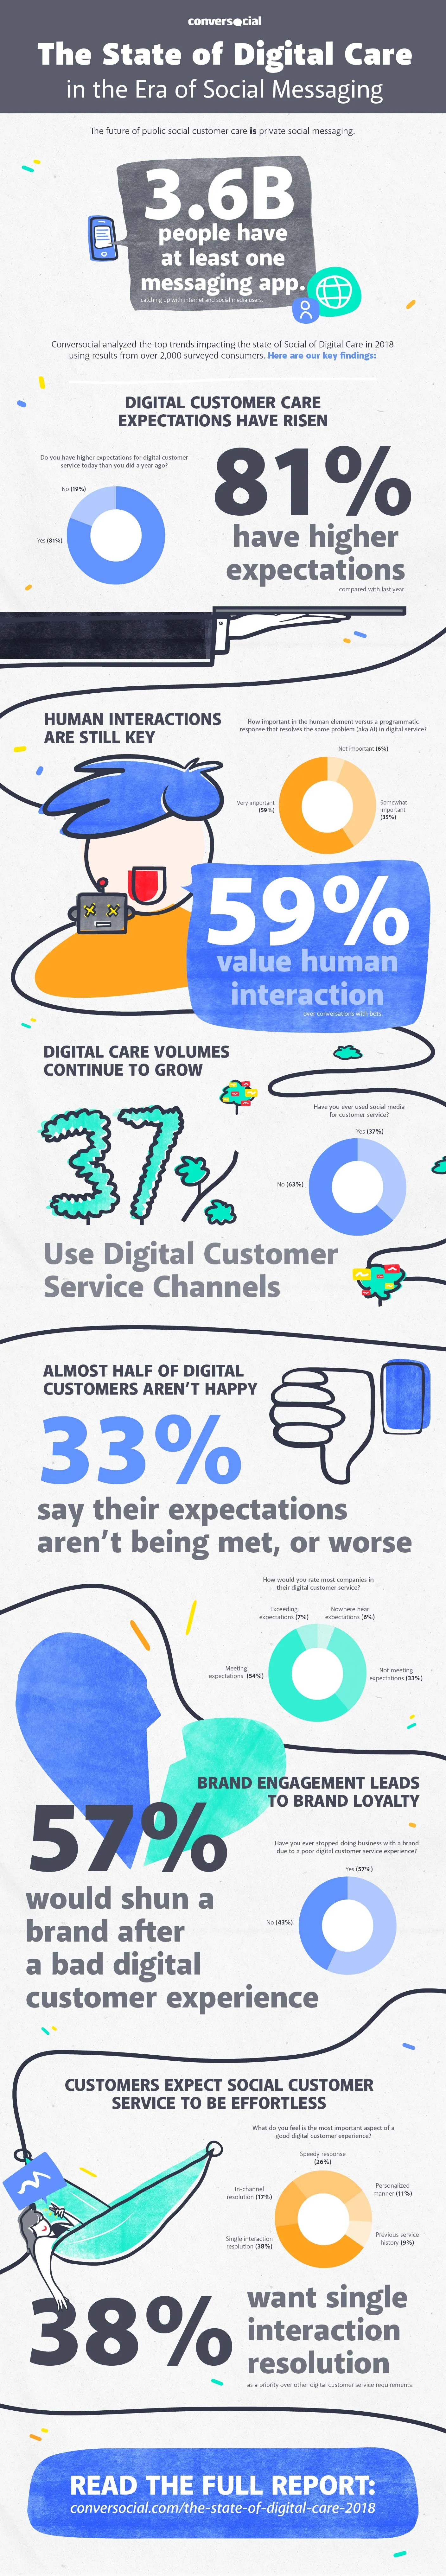 The State of Digital Care in the Era of Social Messaging - #infographic